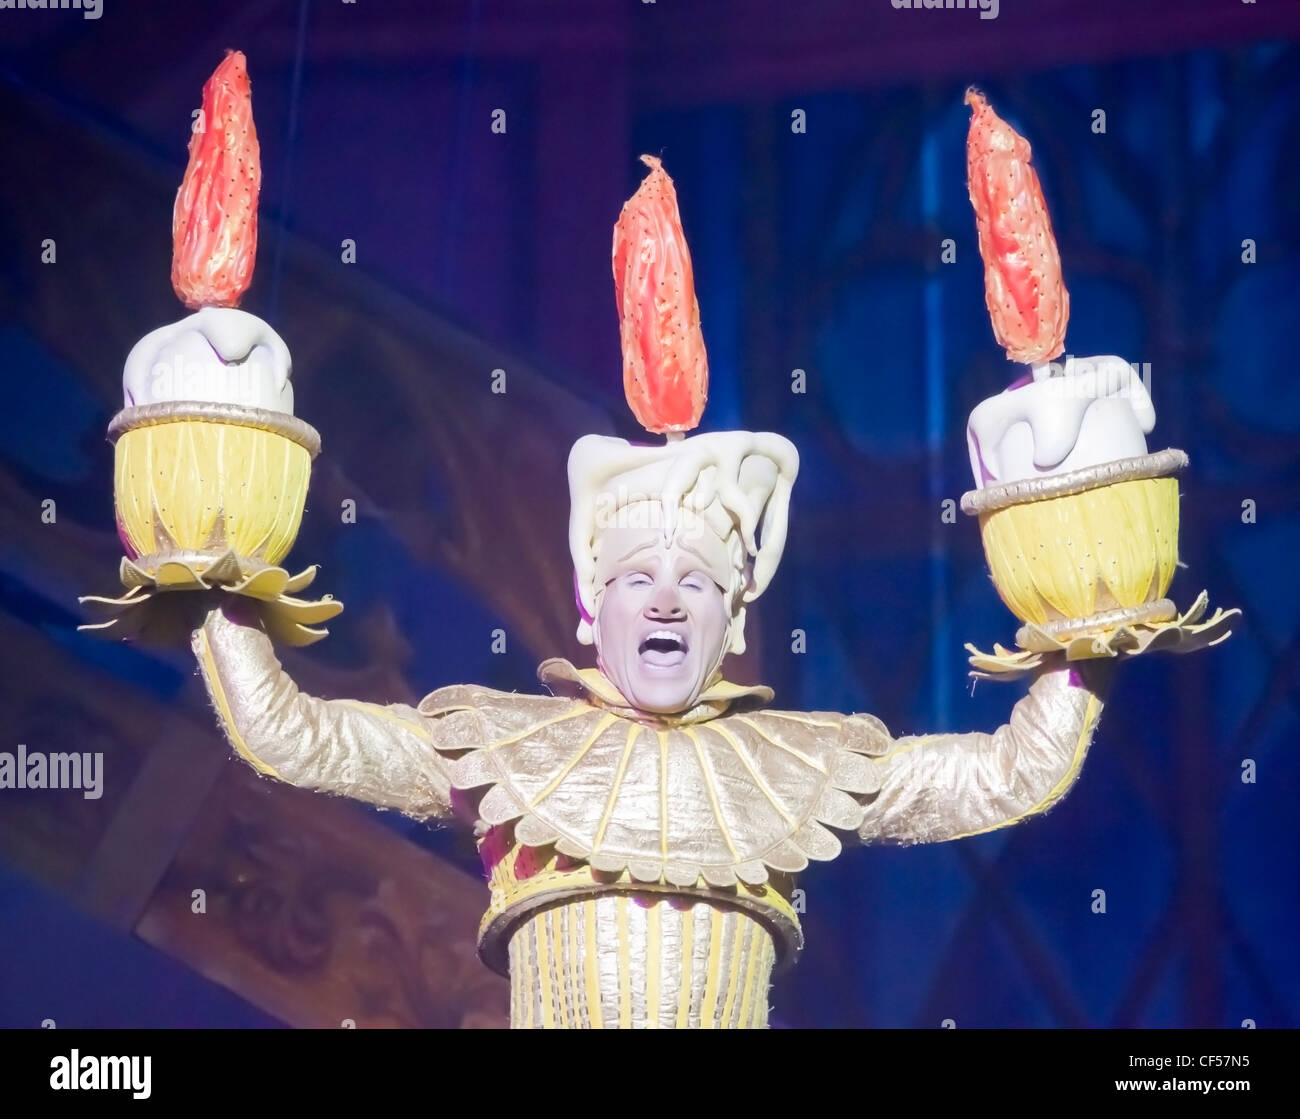 Lumiere the singing candlestick from Beauty and the Beast sings to the audience at the Disney Princesses show in Green Bay Stock Photo